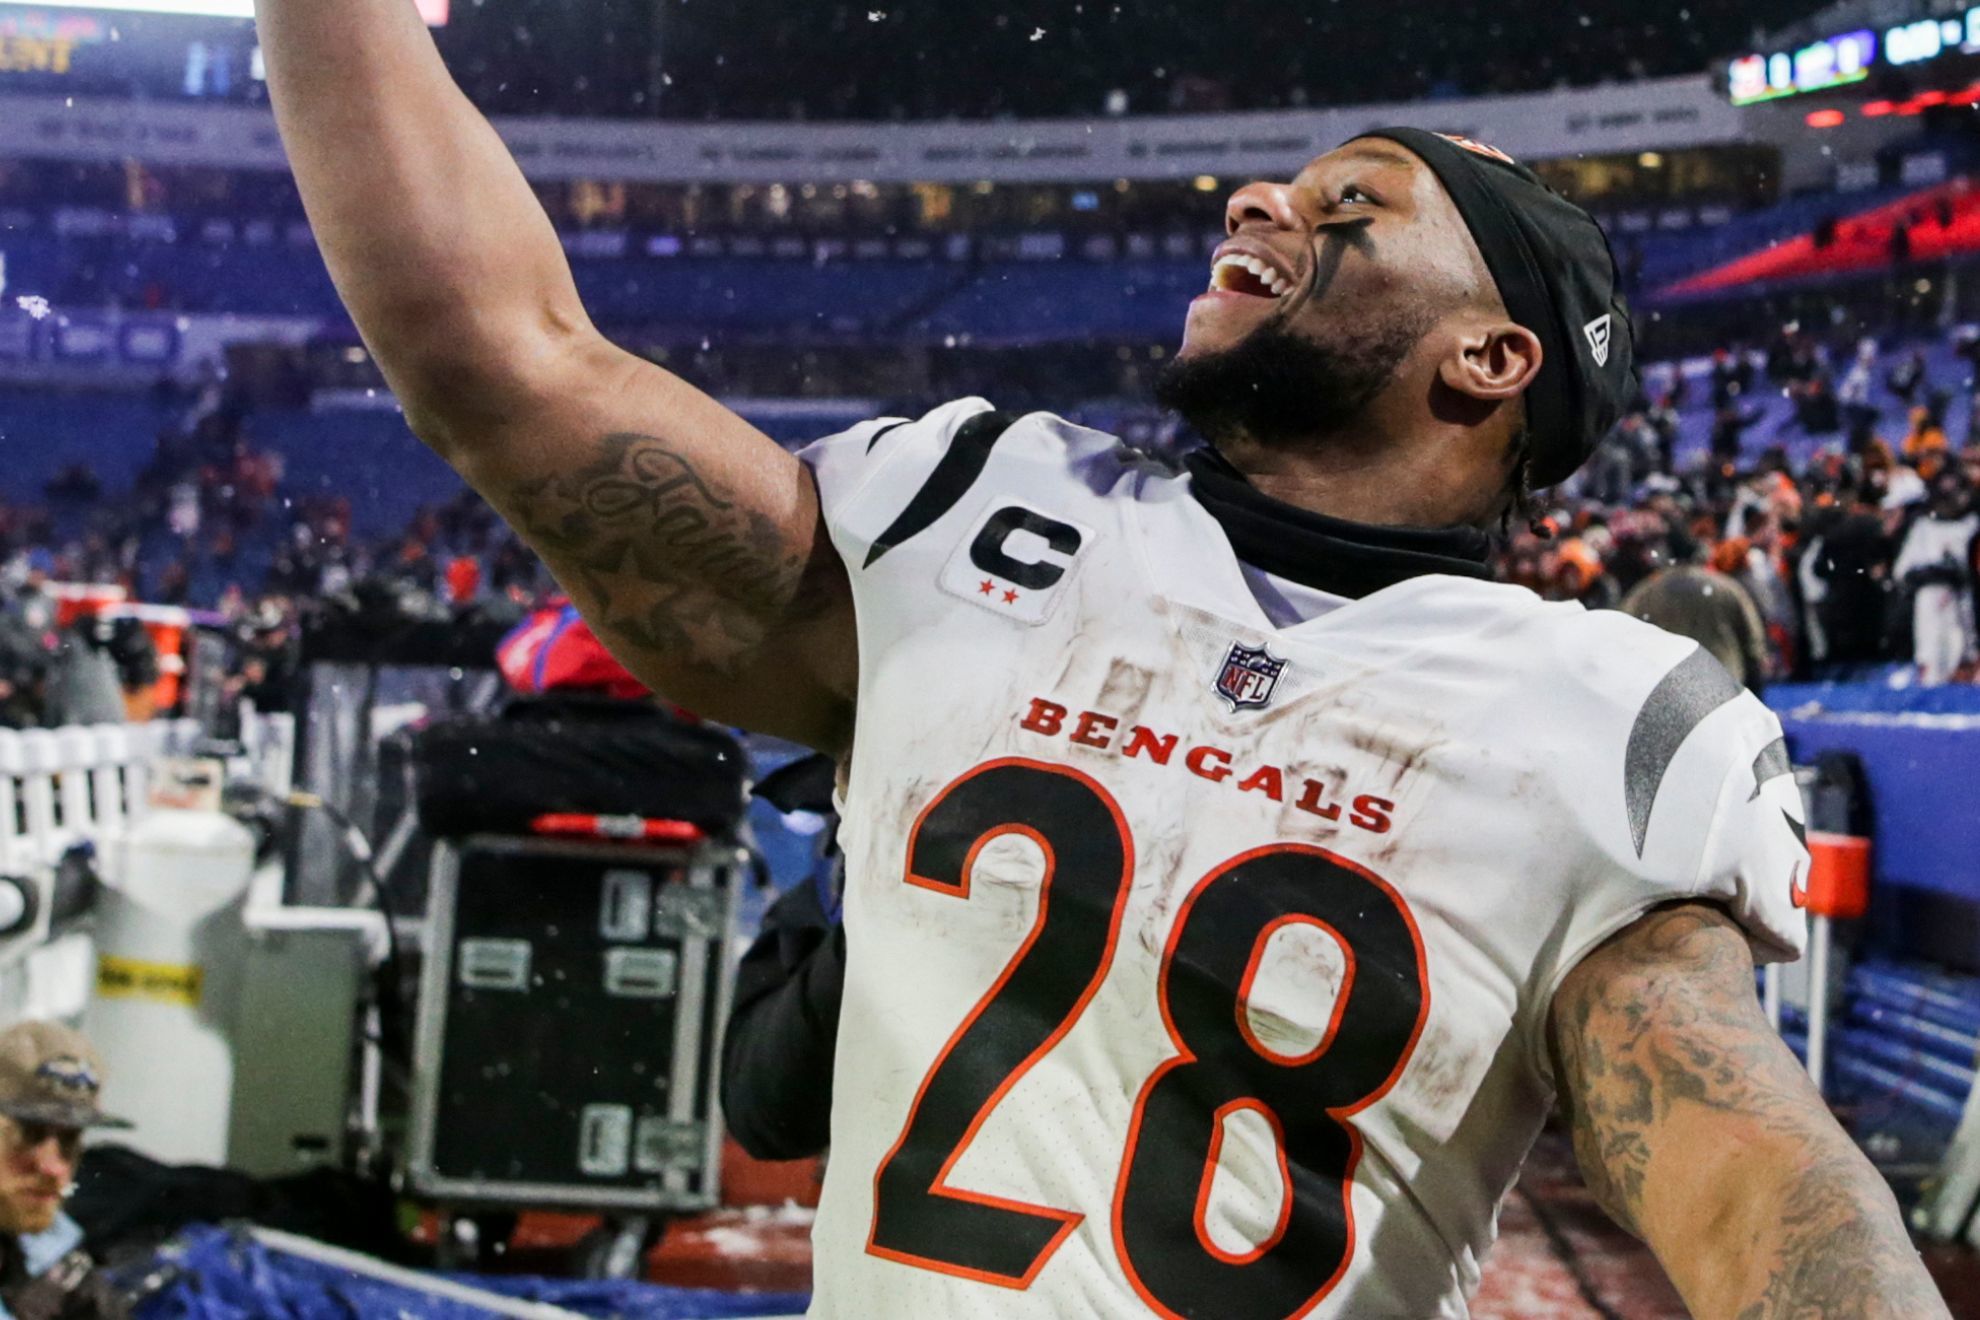 Bengals RB Joe Mixon celebrates win over Bills one day after alleged incident